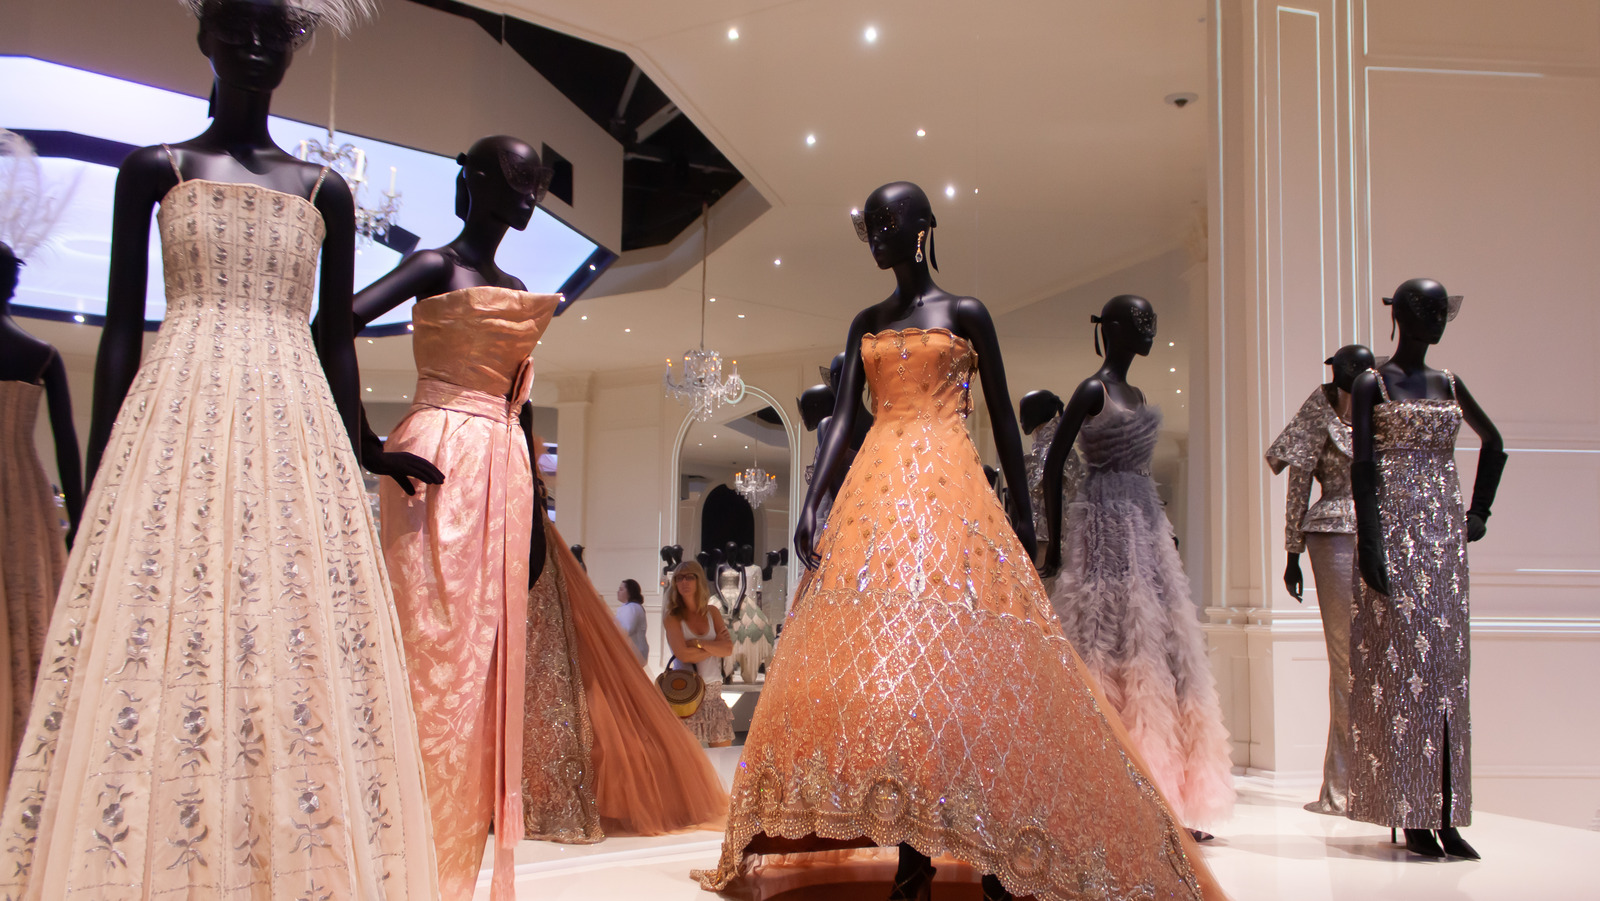 This Dior Haute Couture Dress Took 800 Hours to Make